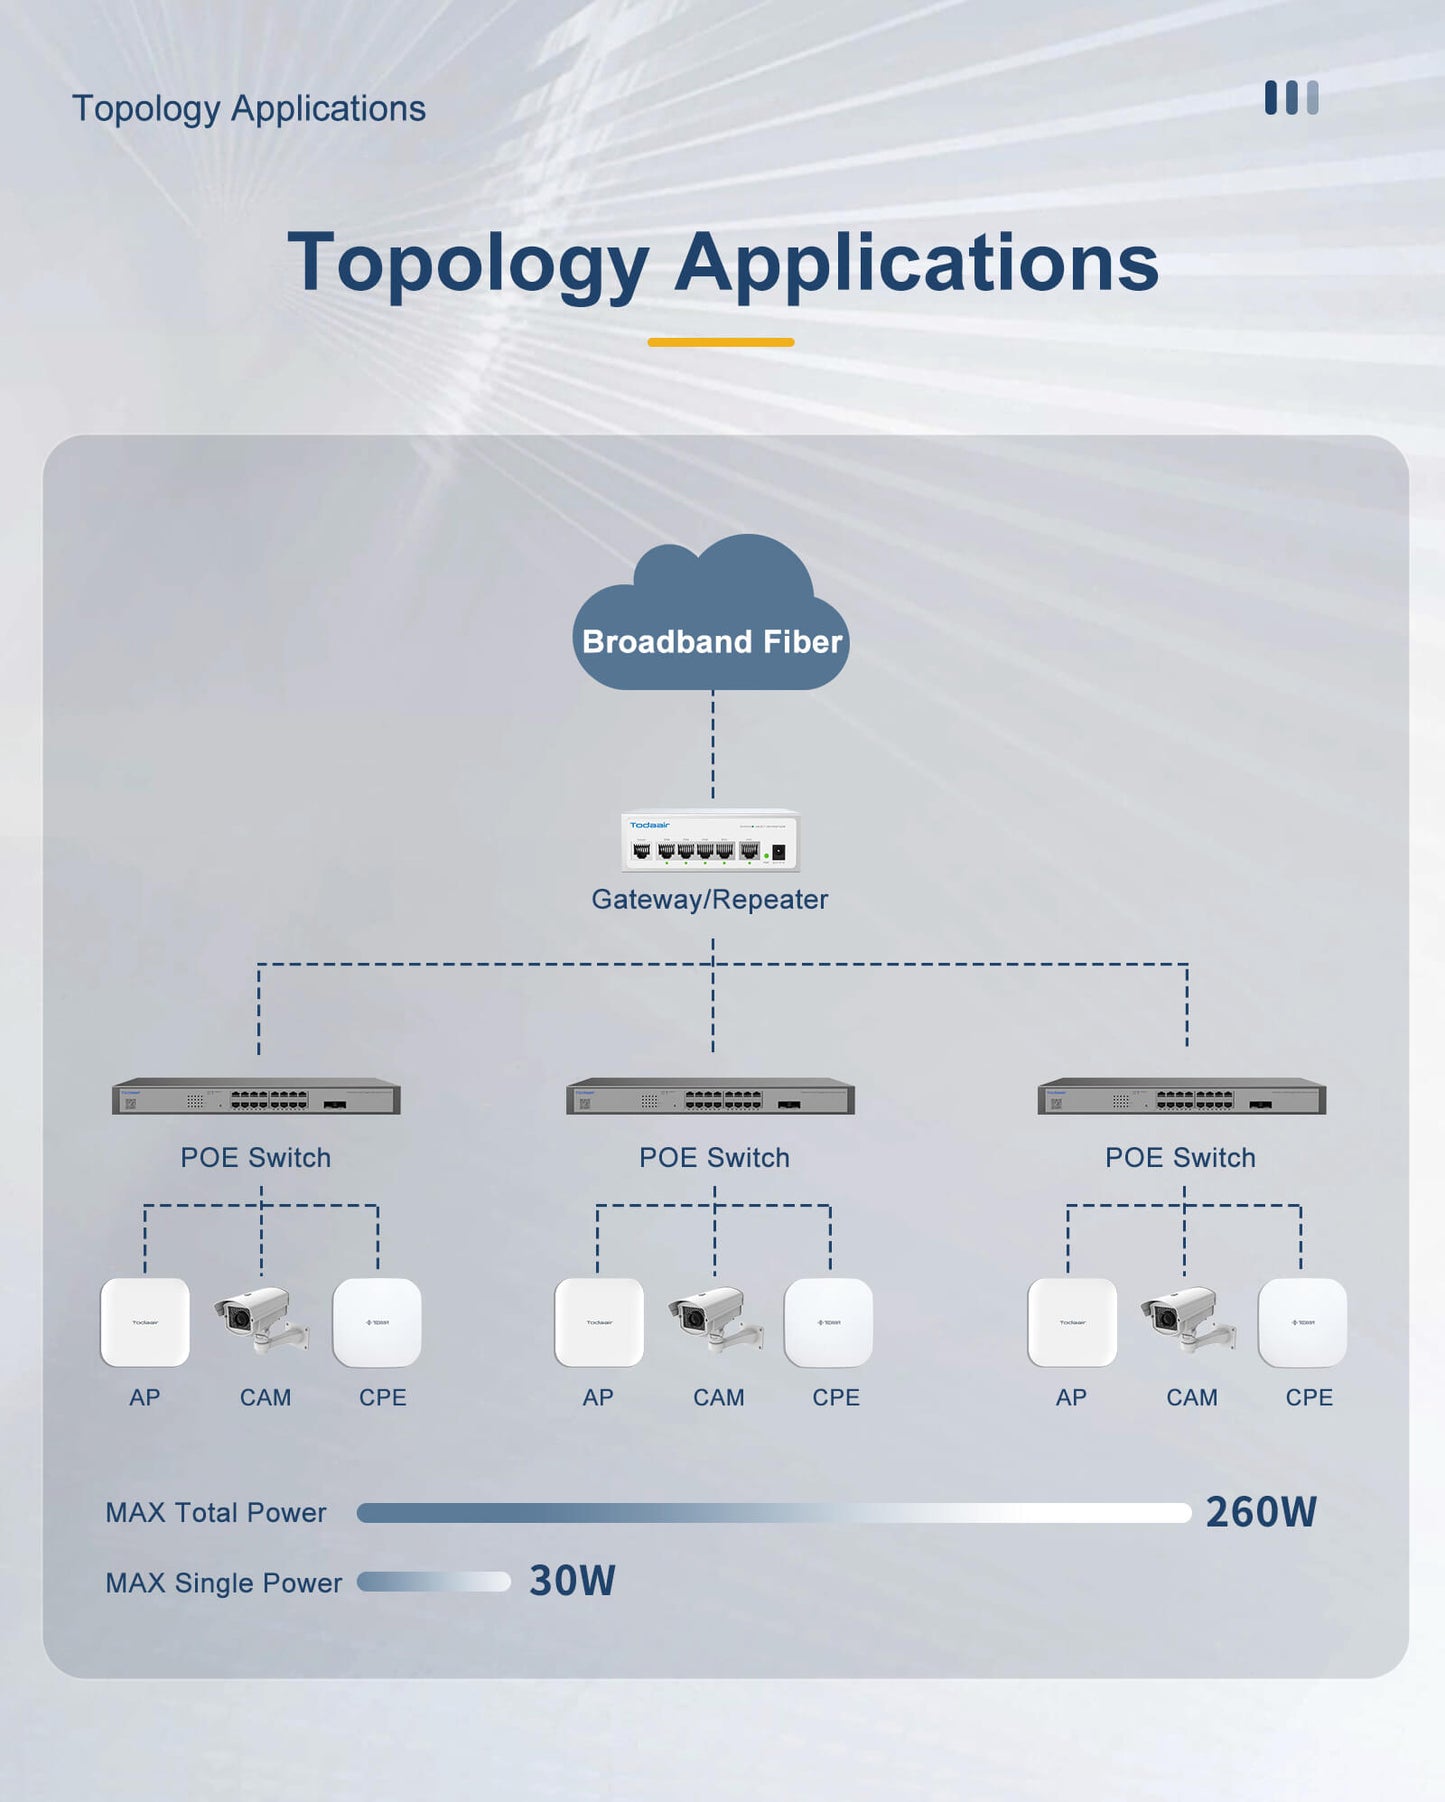 Poe network switch topology application